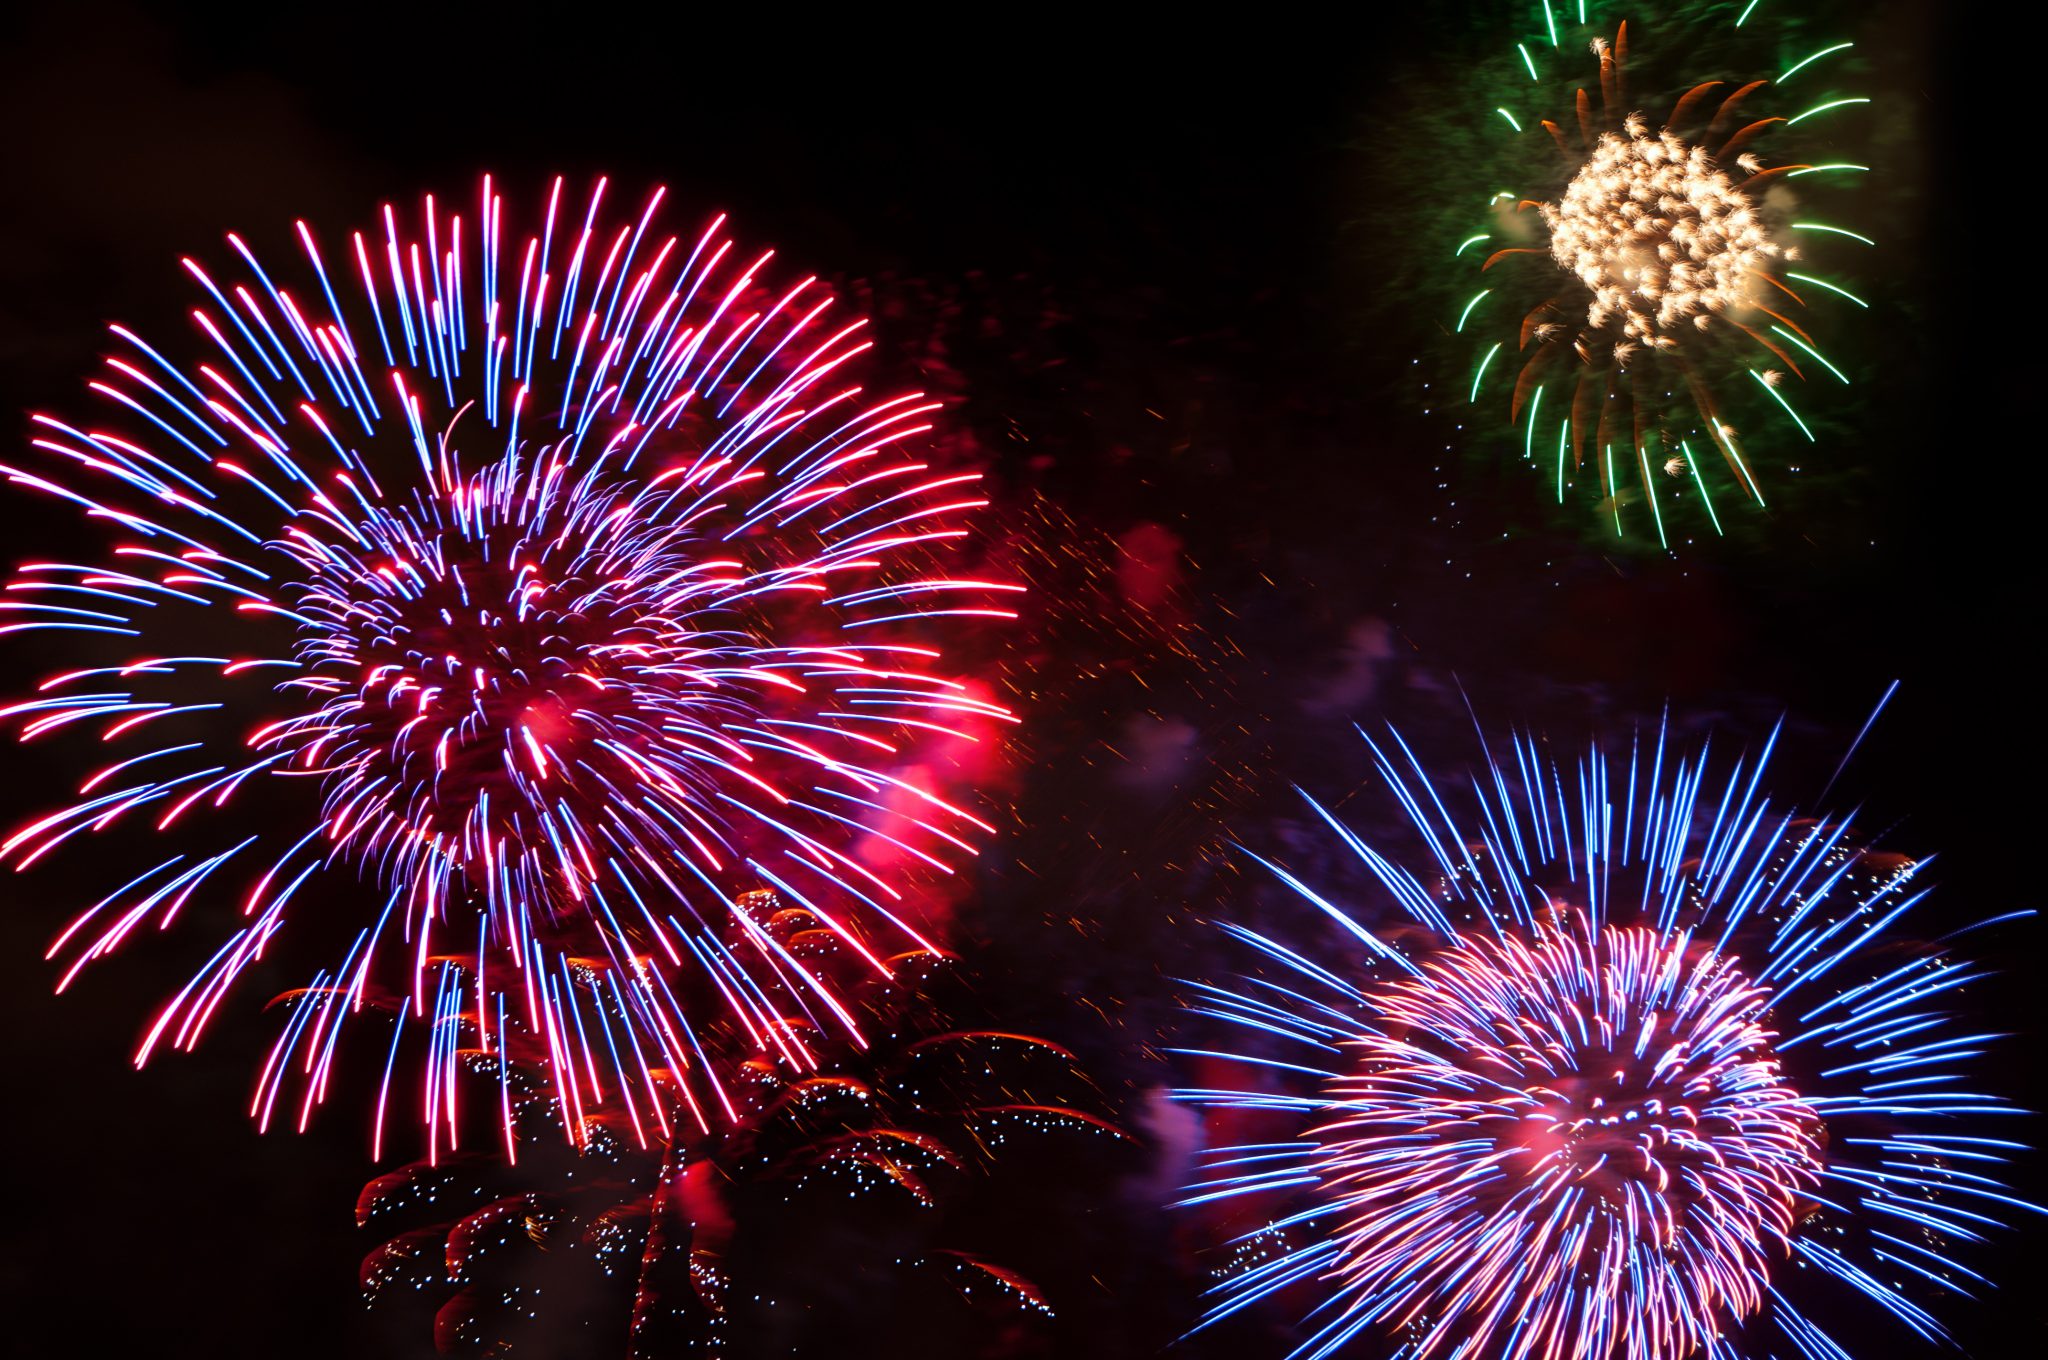 Where to Watch Fireworks in Indiana Your 2021 Guide